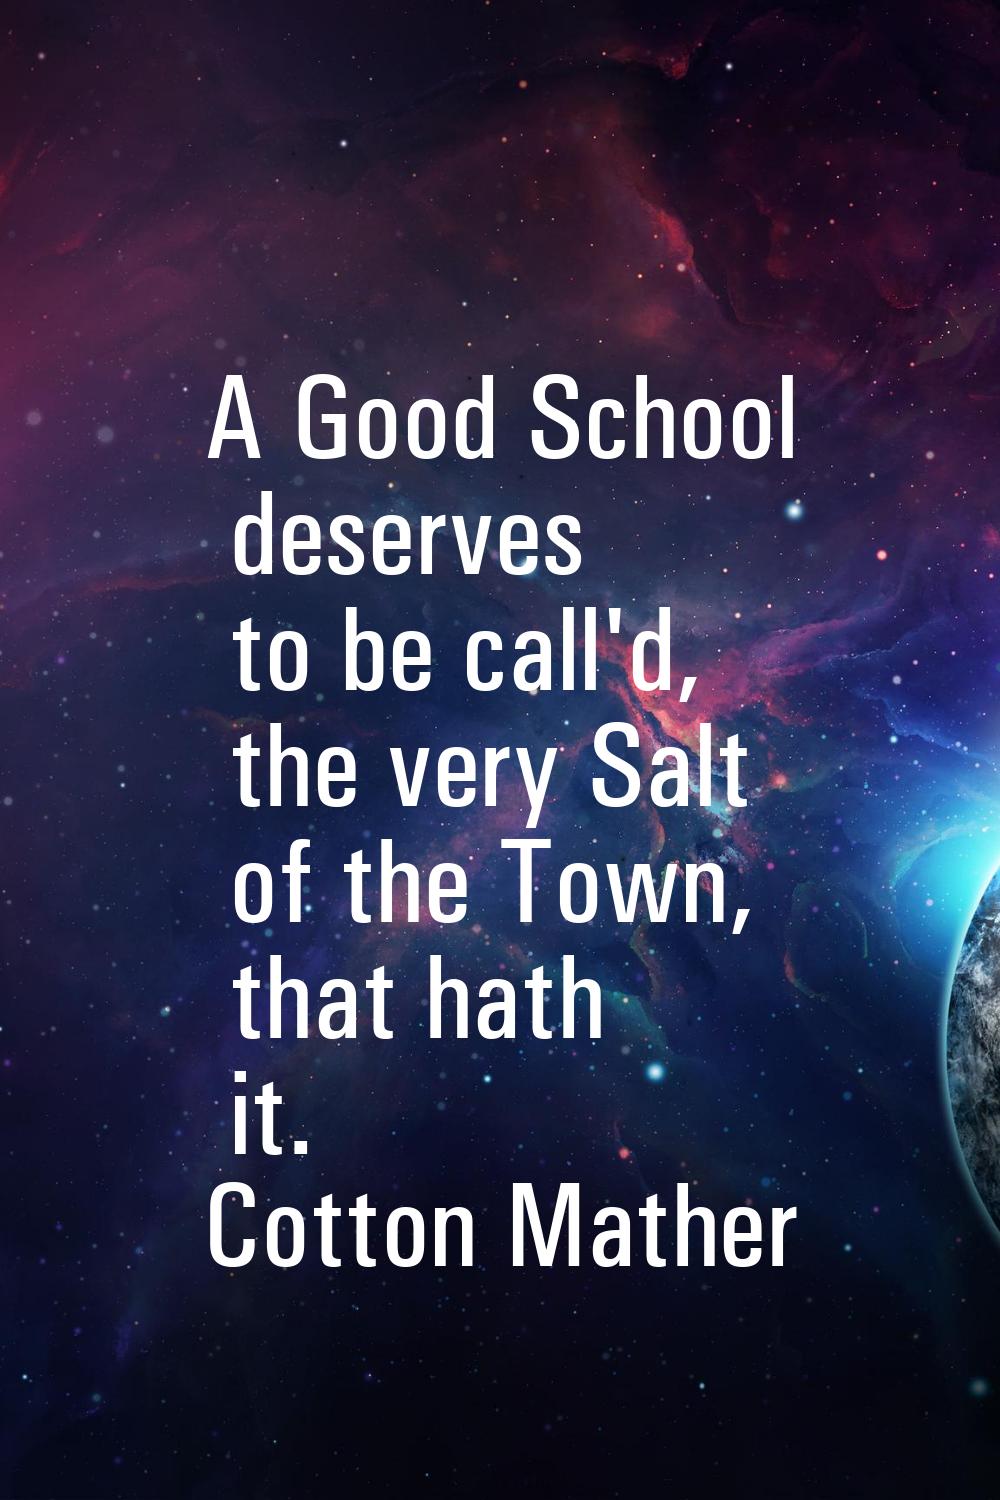 A Good School deserves to be call'd, the very Salt of the Town, that hath it.